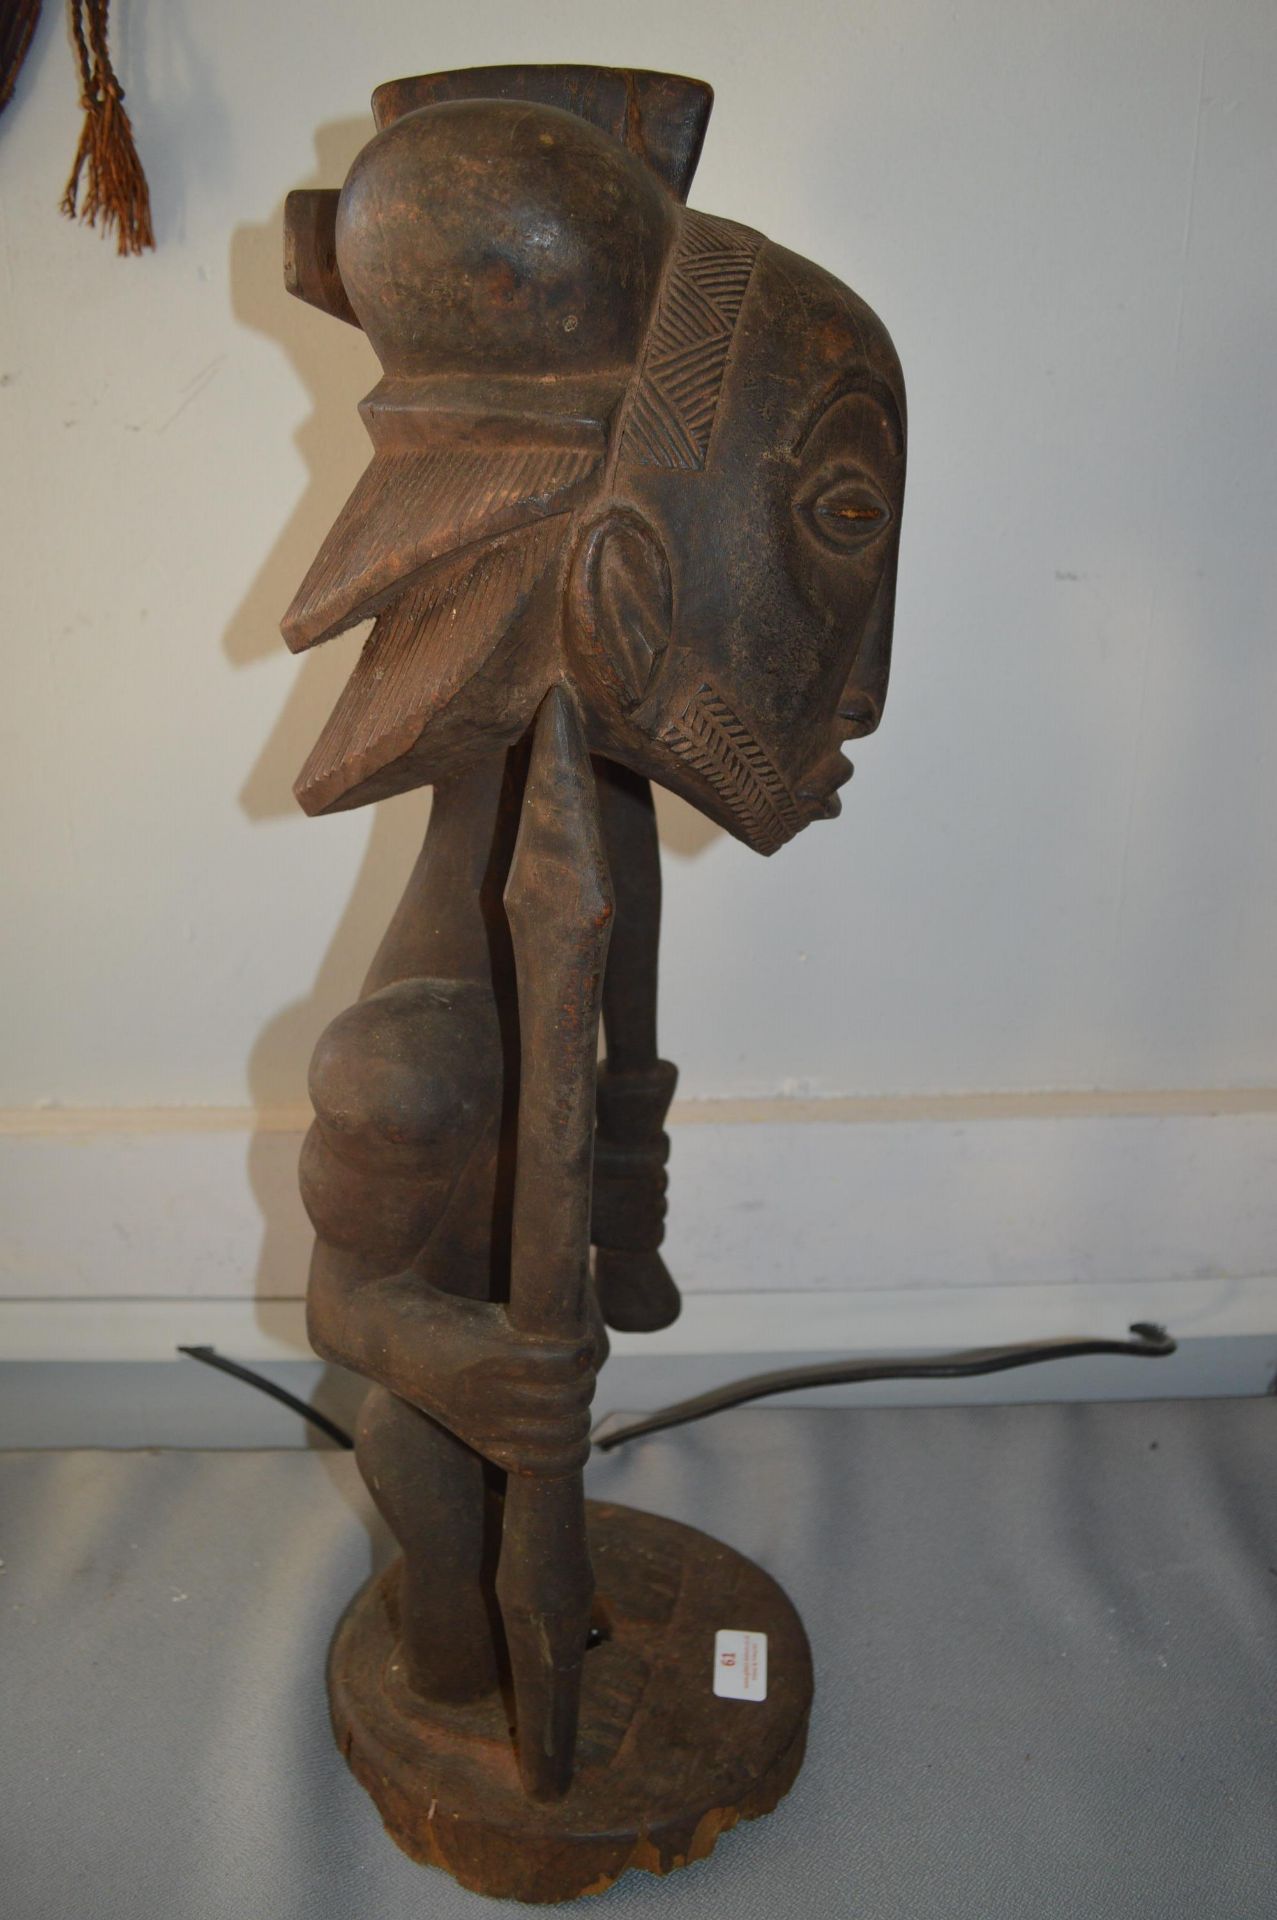 Luba Carved Wooden Male Tribal Fertility Figure - Image 2 of 4